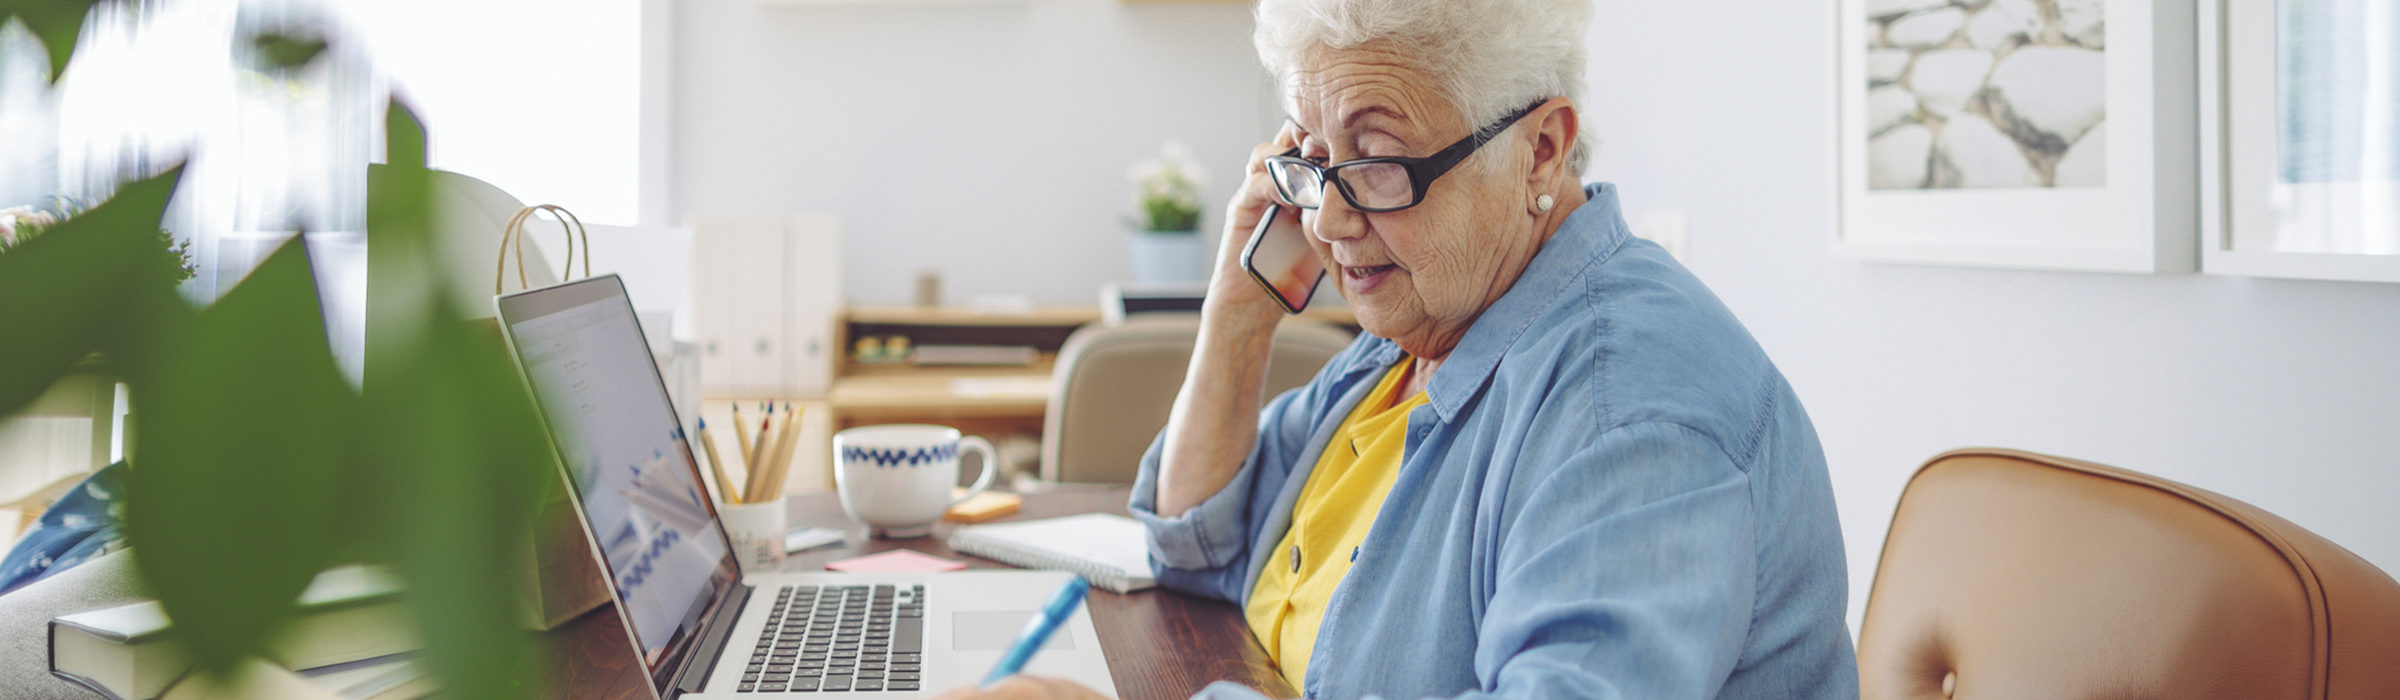 Older woman talking on her cellphone and paying her bills at her laptop